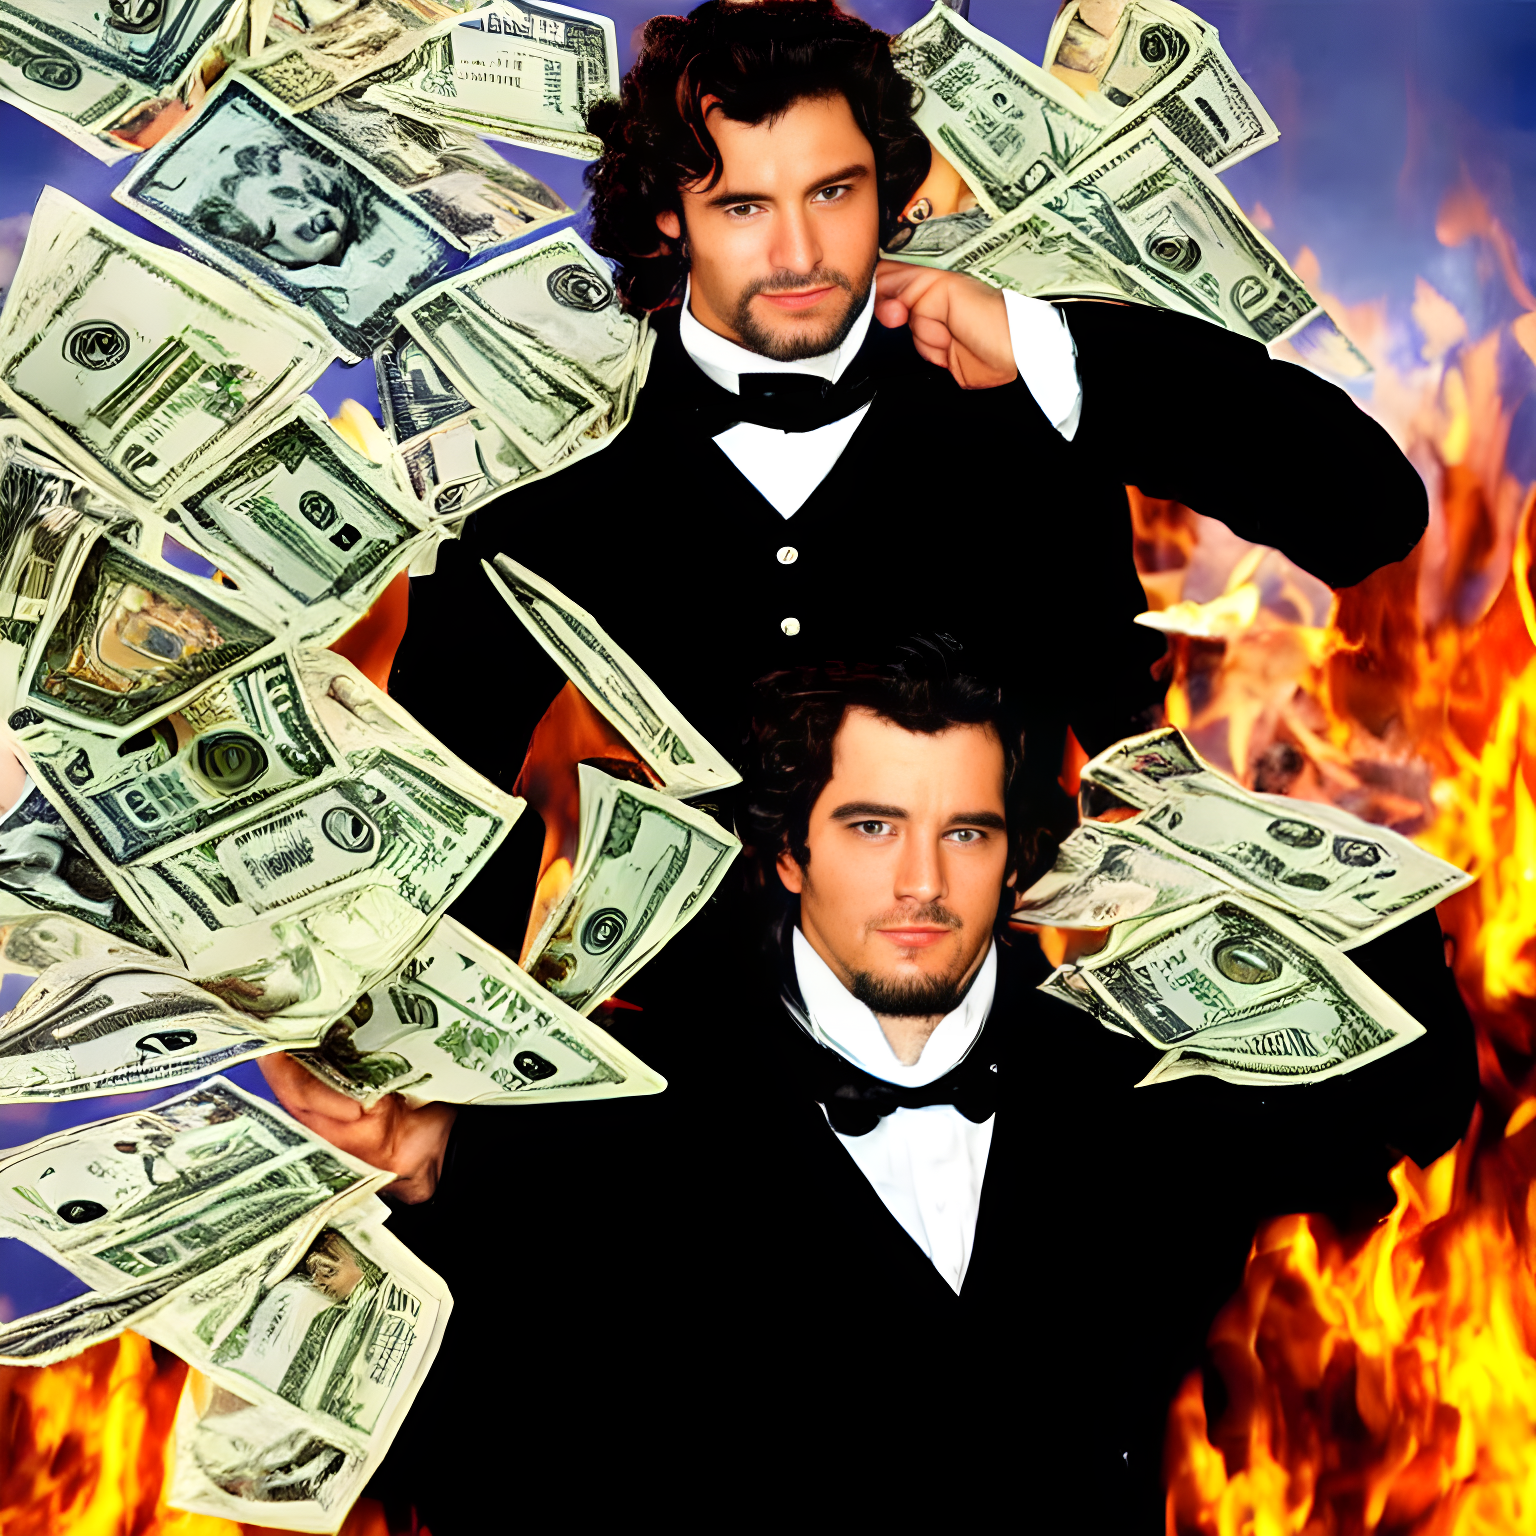 Illustrate the count of monte cristo holding a bank of money in front of a burning bank.